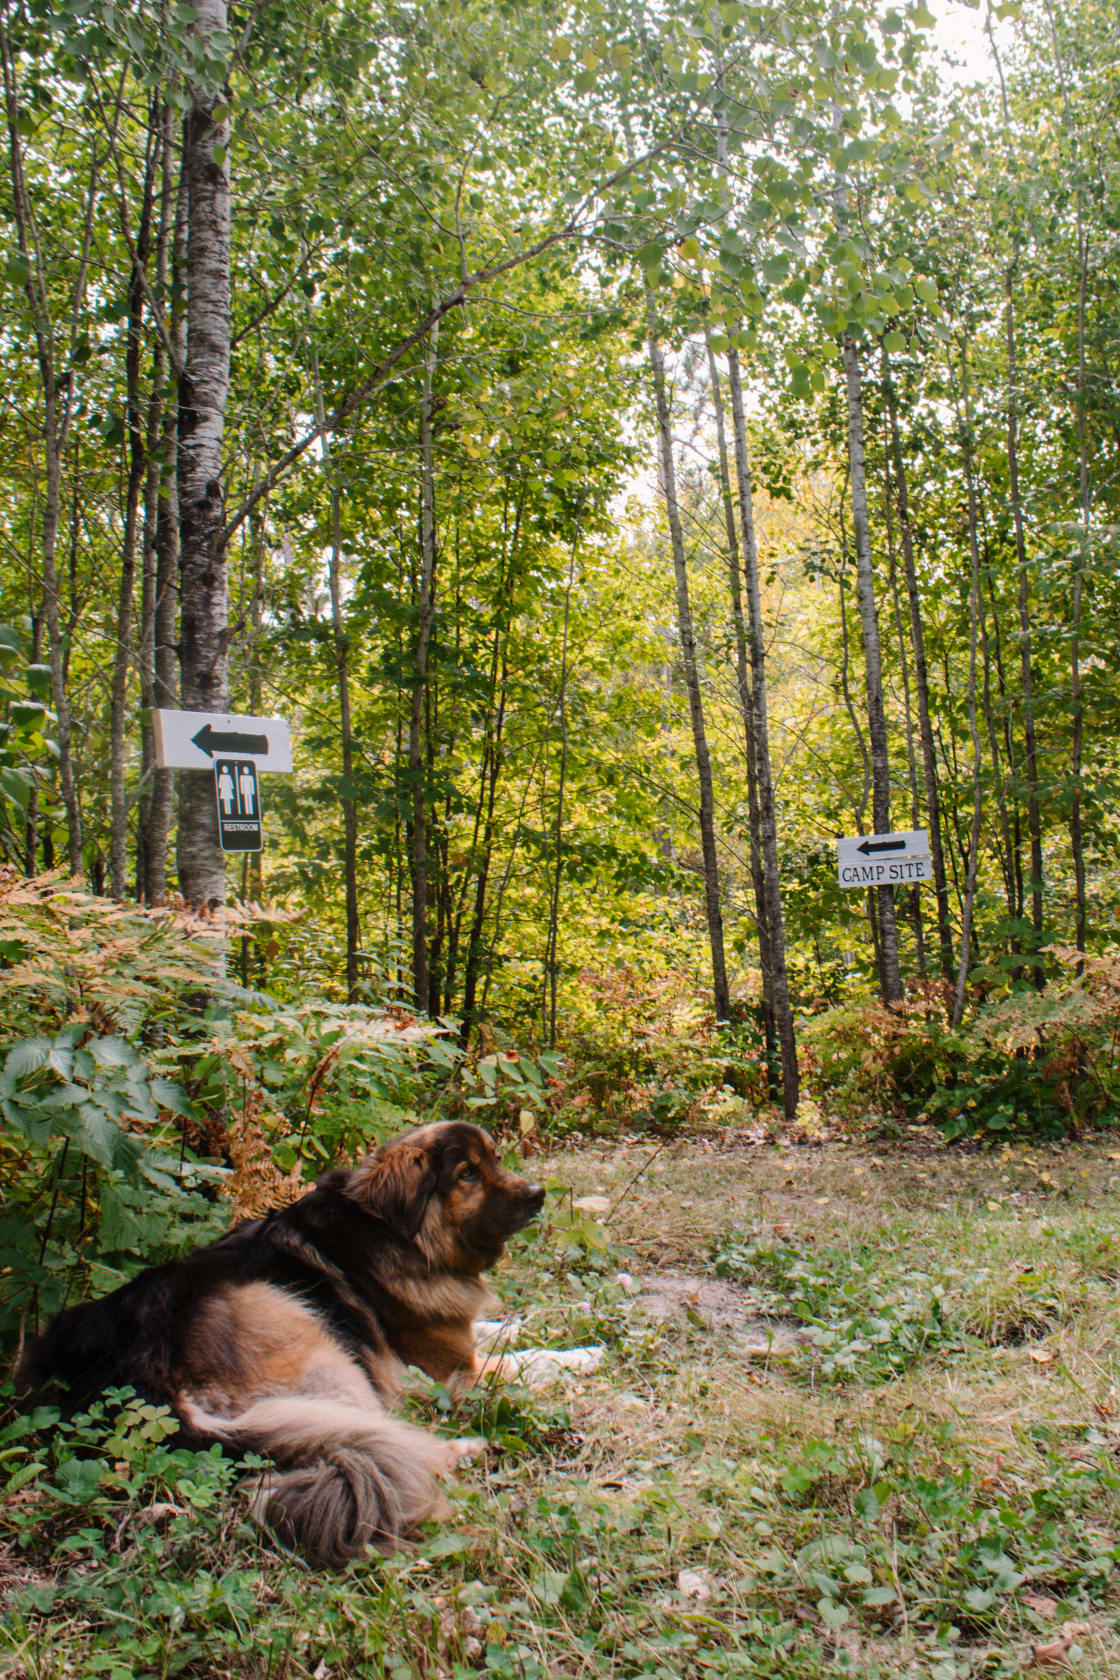 The property is clearly marked with signs showing you where to find the outhouse, campsite, and parking area. 